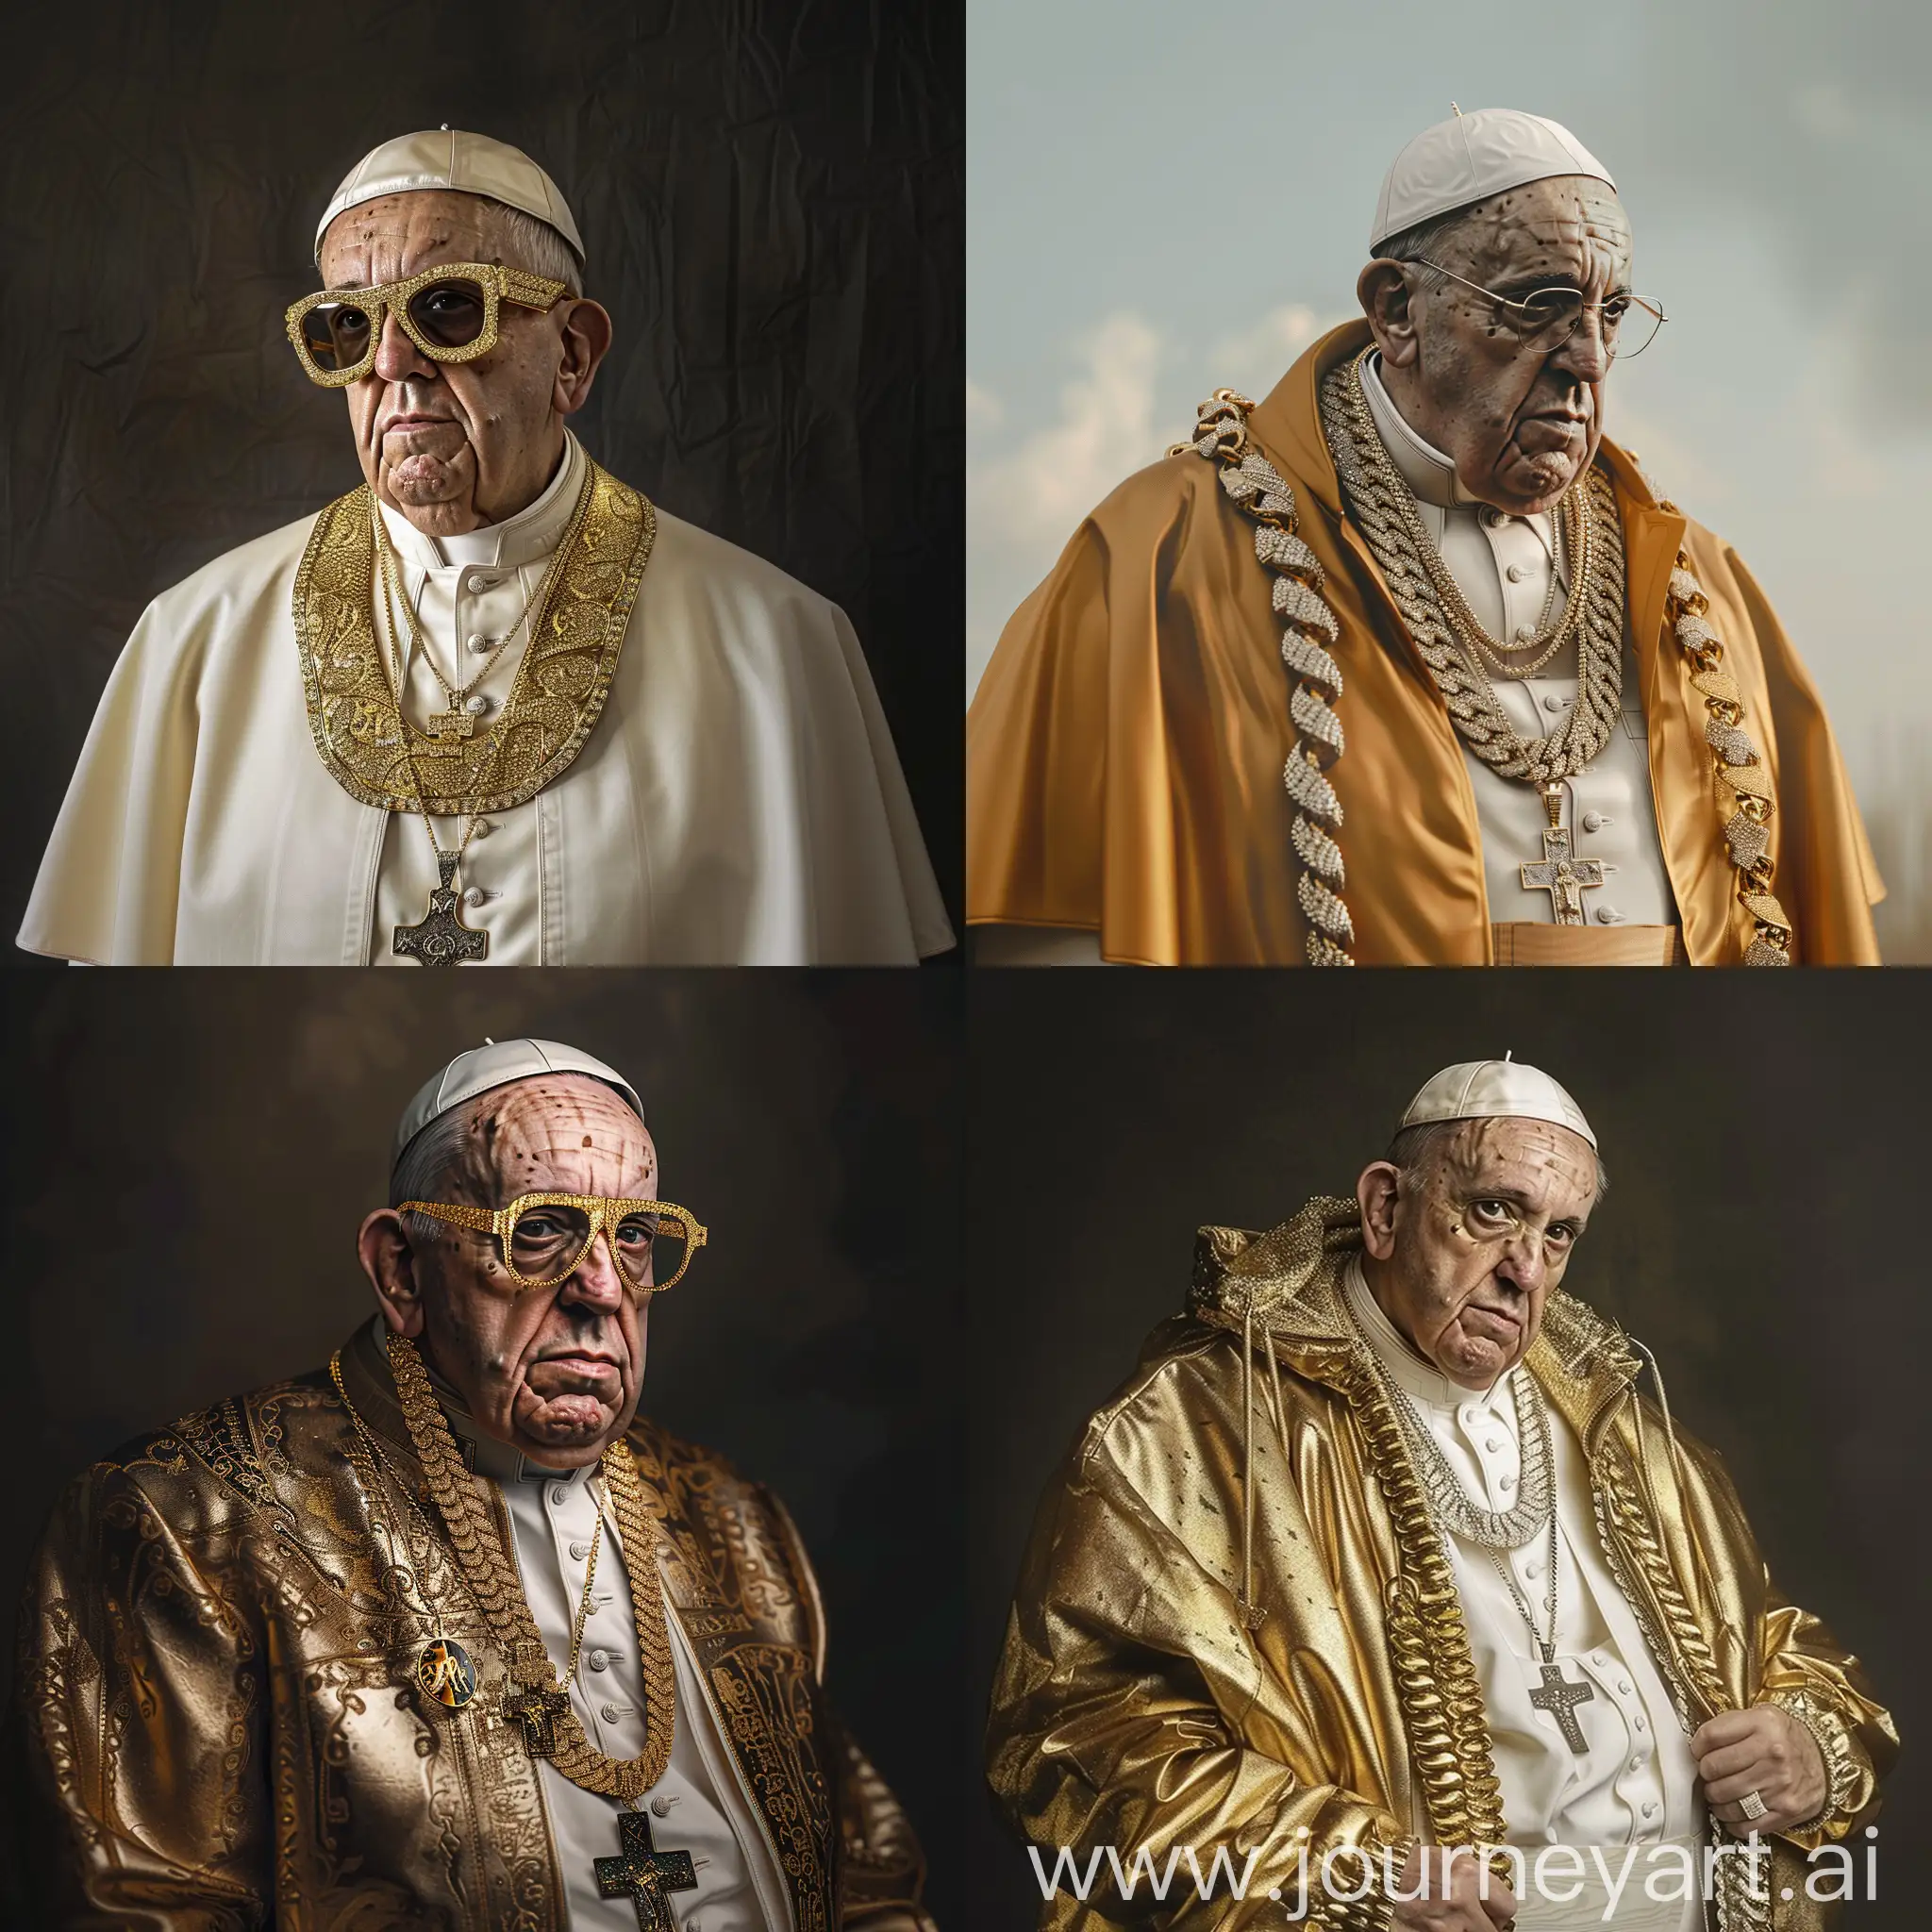 Pope-Transformed-HipHop-Style-Papal-Persona